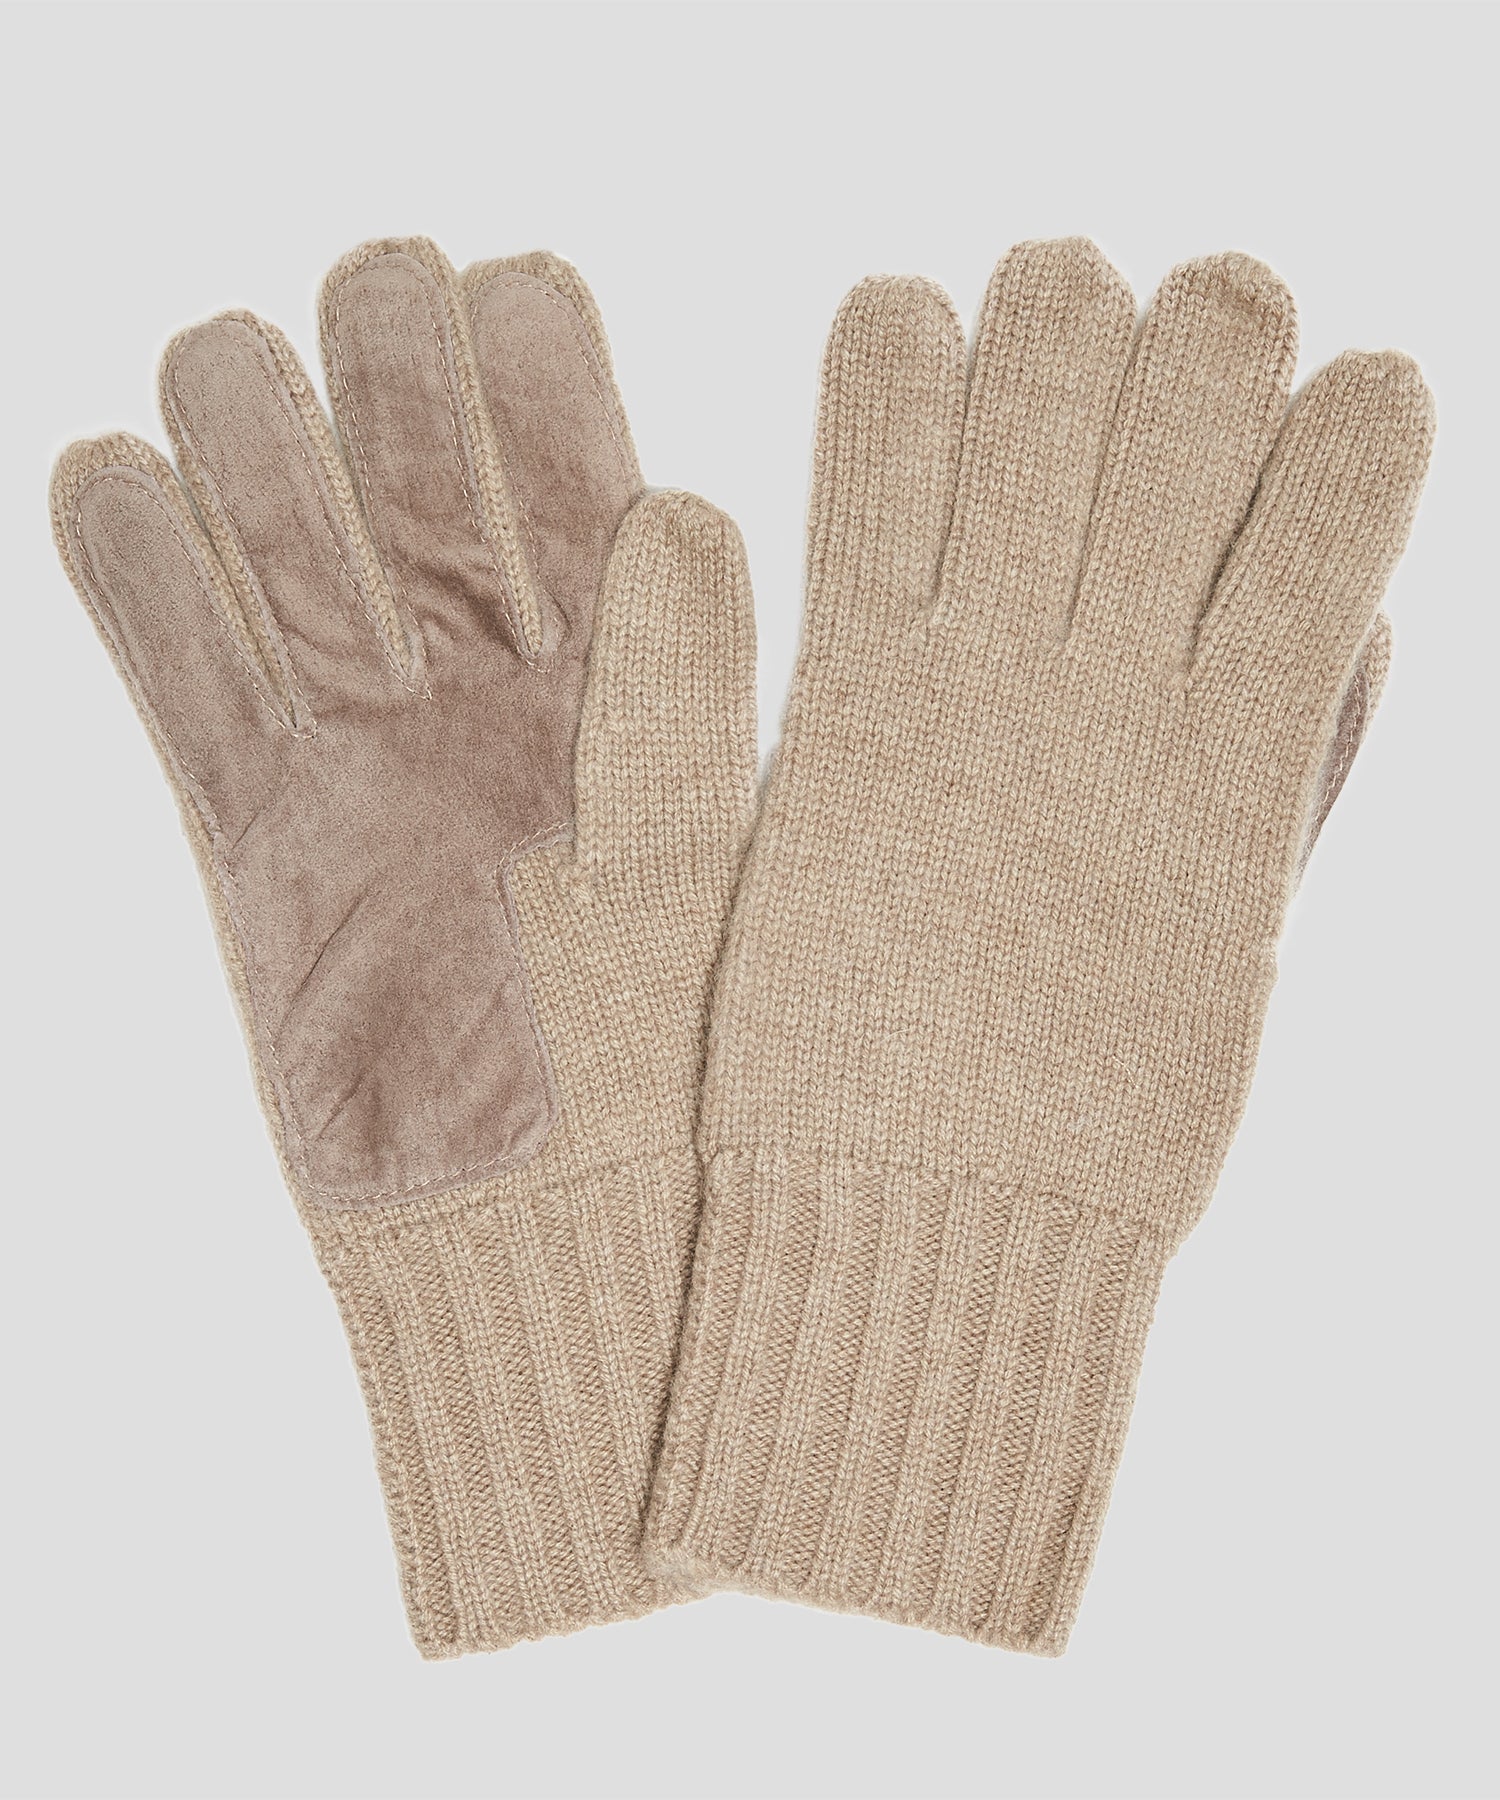 Dents Cardiff Cashmere Knitted Gloves with Suede Palm Patch in Camel